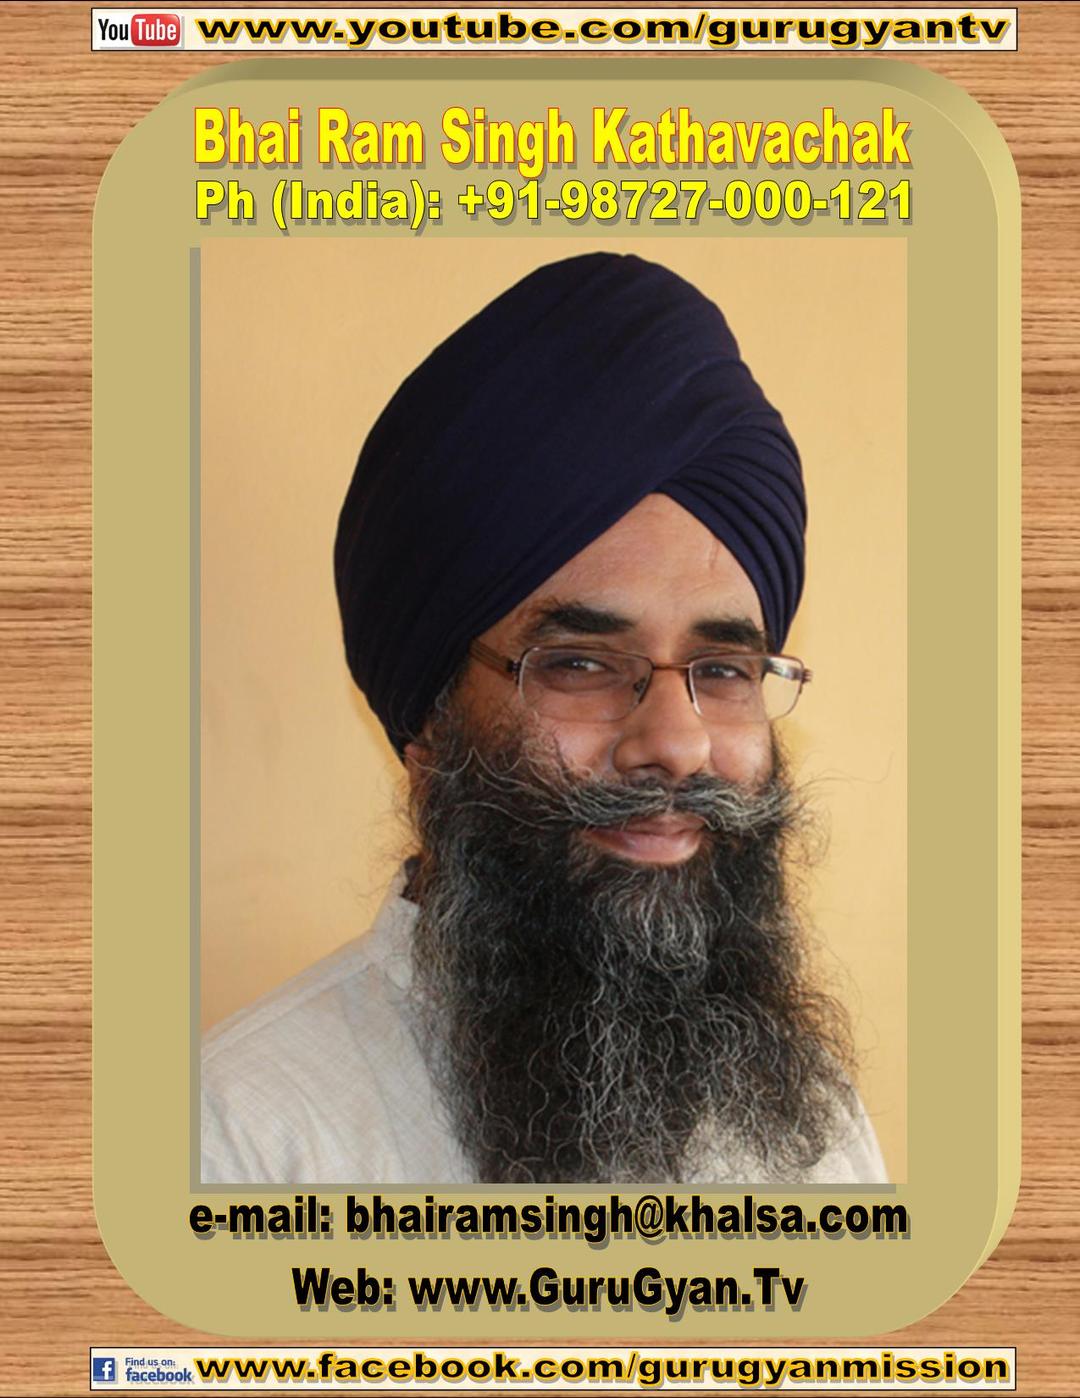 Seminar-How to sow the seeds about Gurmat in our kids